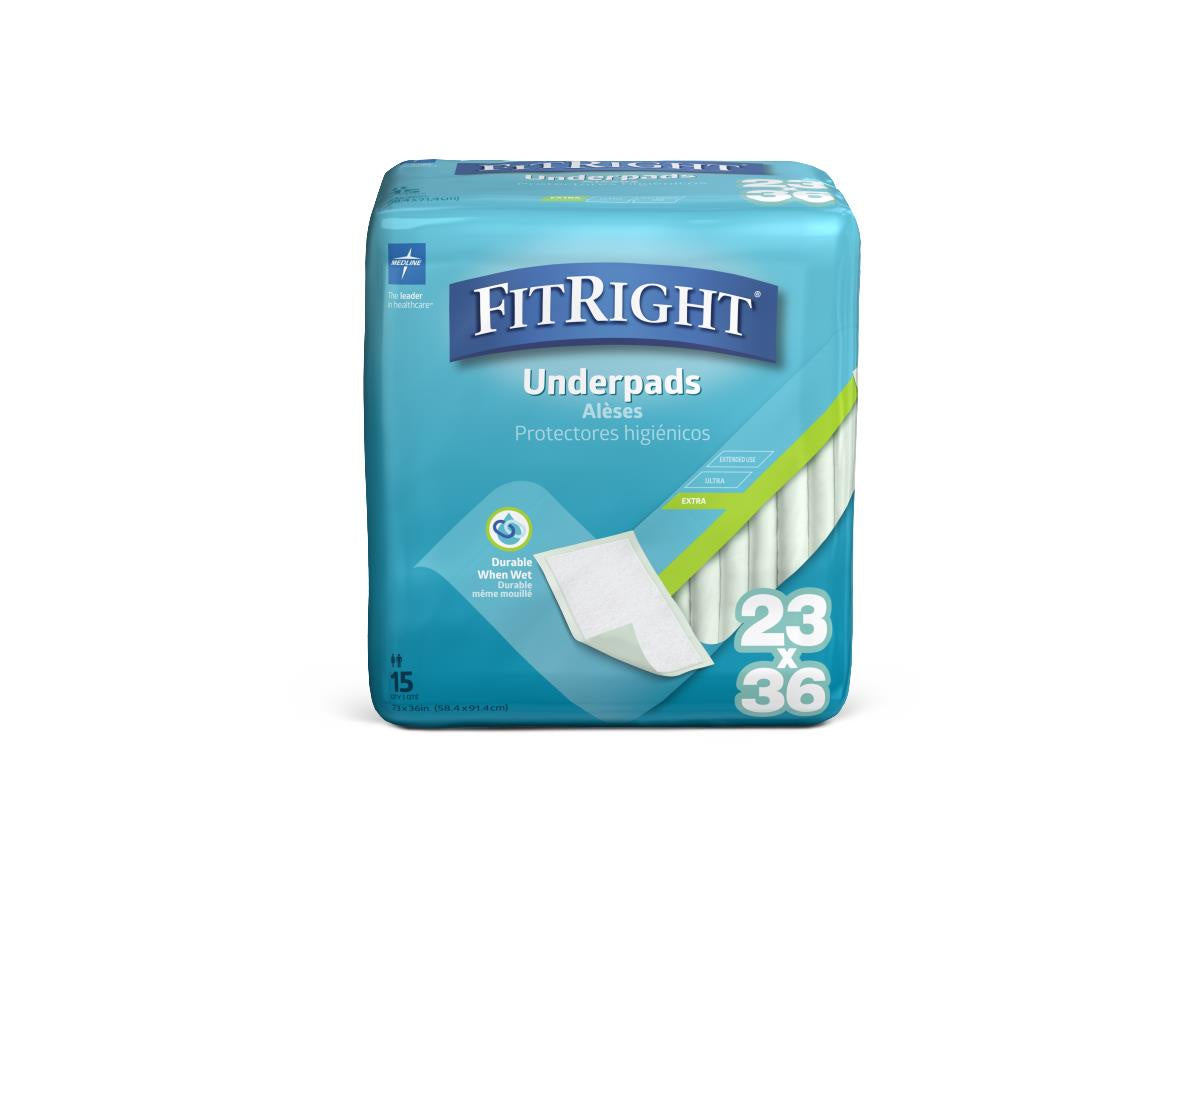 MSC281150 - FitRight Underpad 23x36